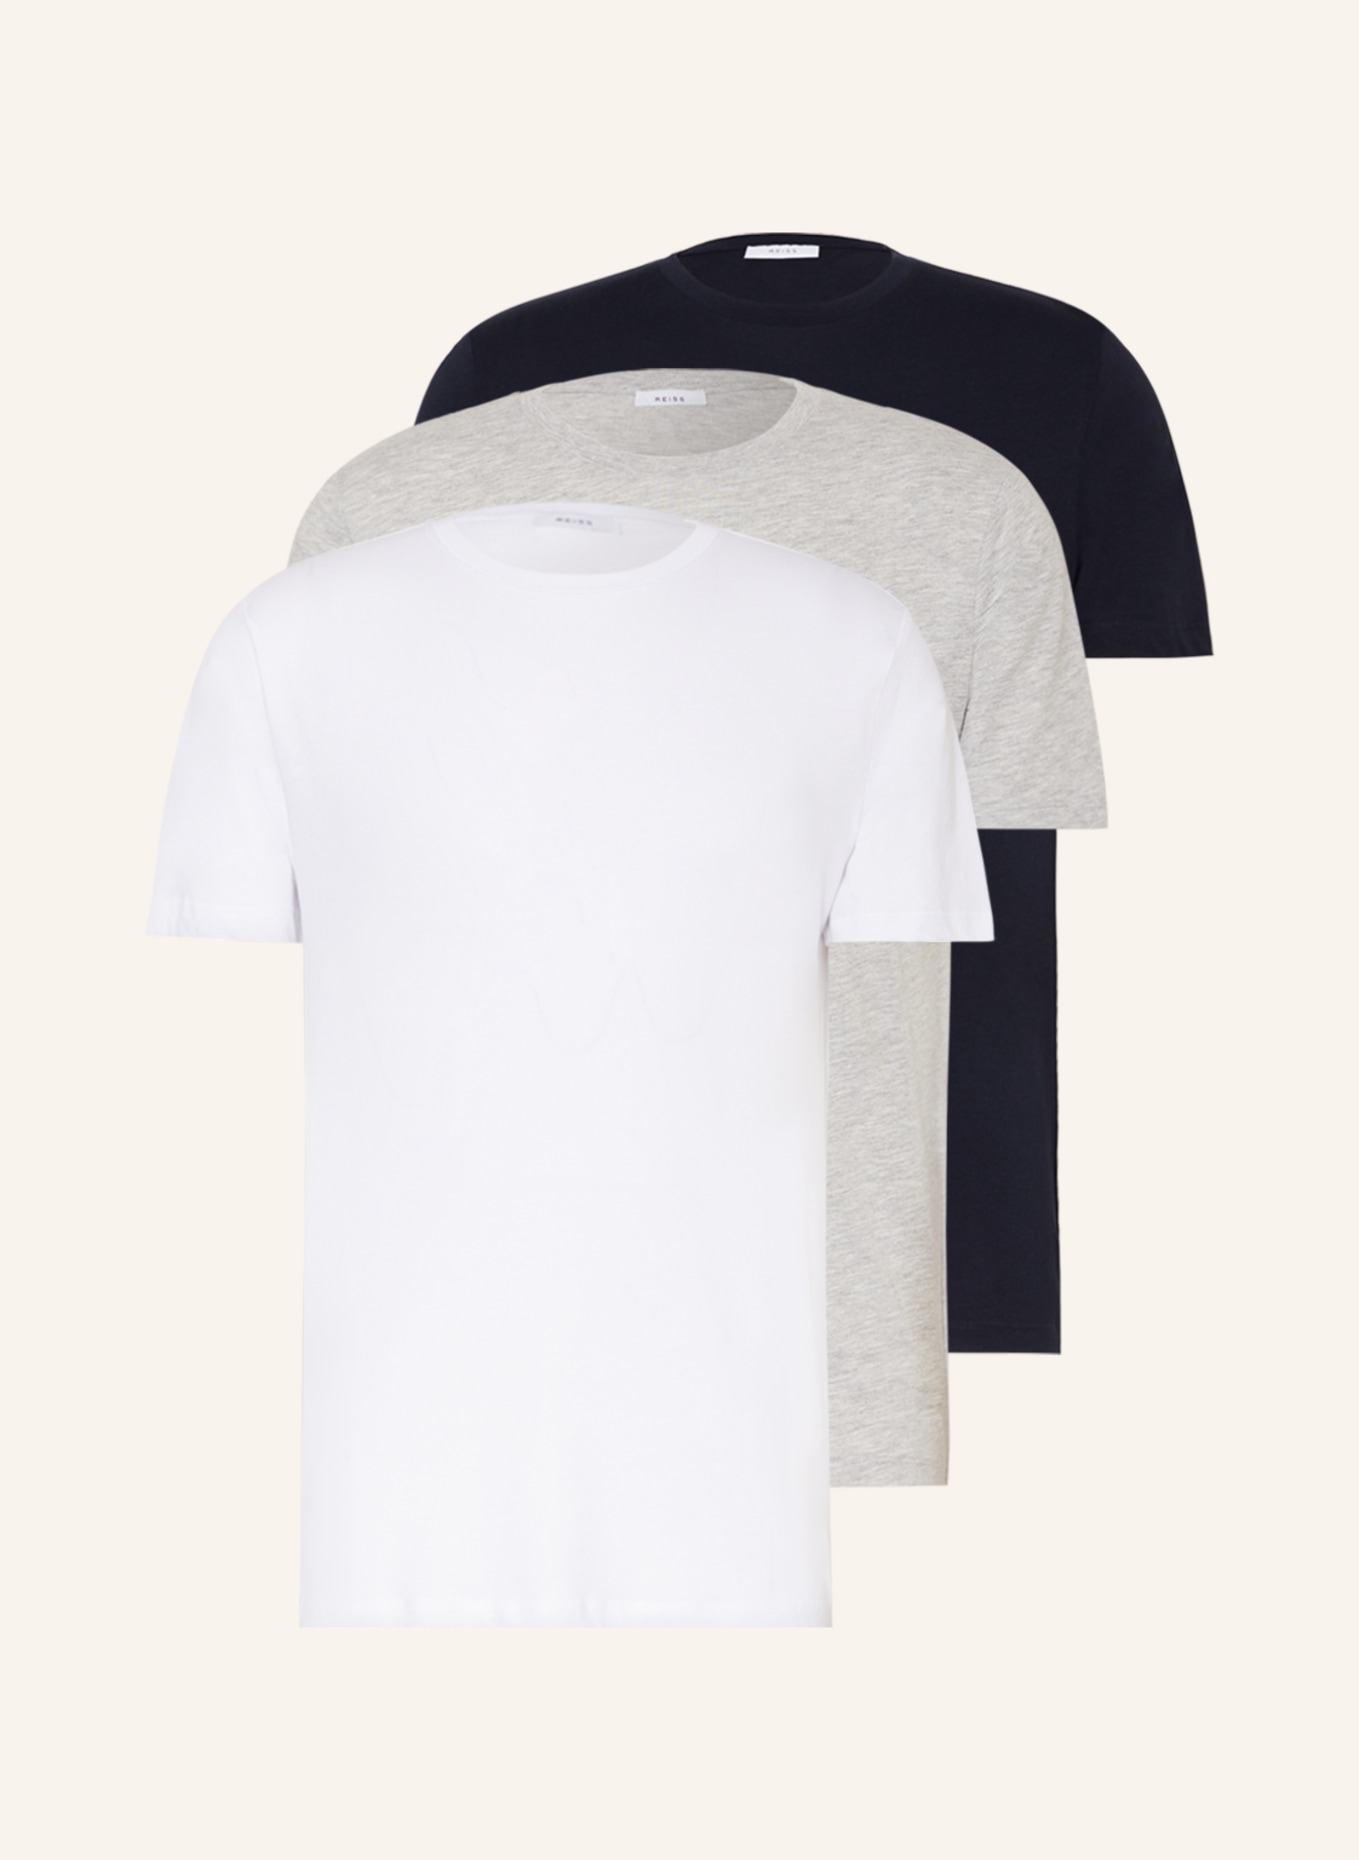 REISS 3-pack T-shirts BLESS, Color: DARK BLUE/ GRAY/ WHITE (Image 1)